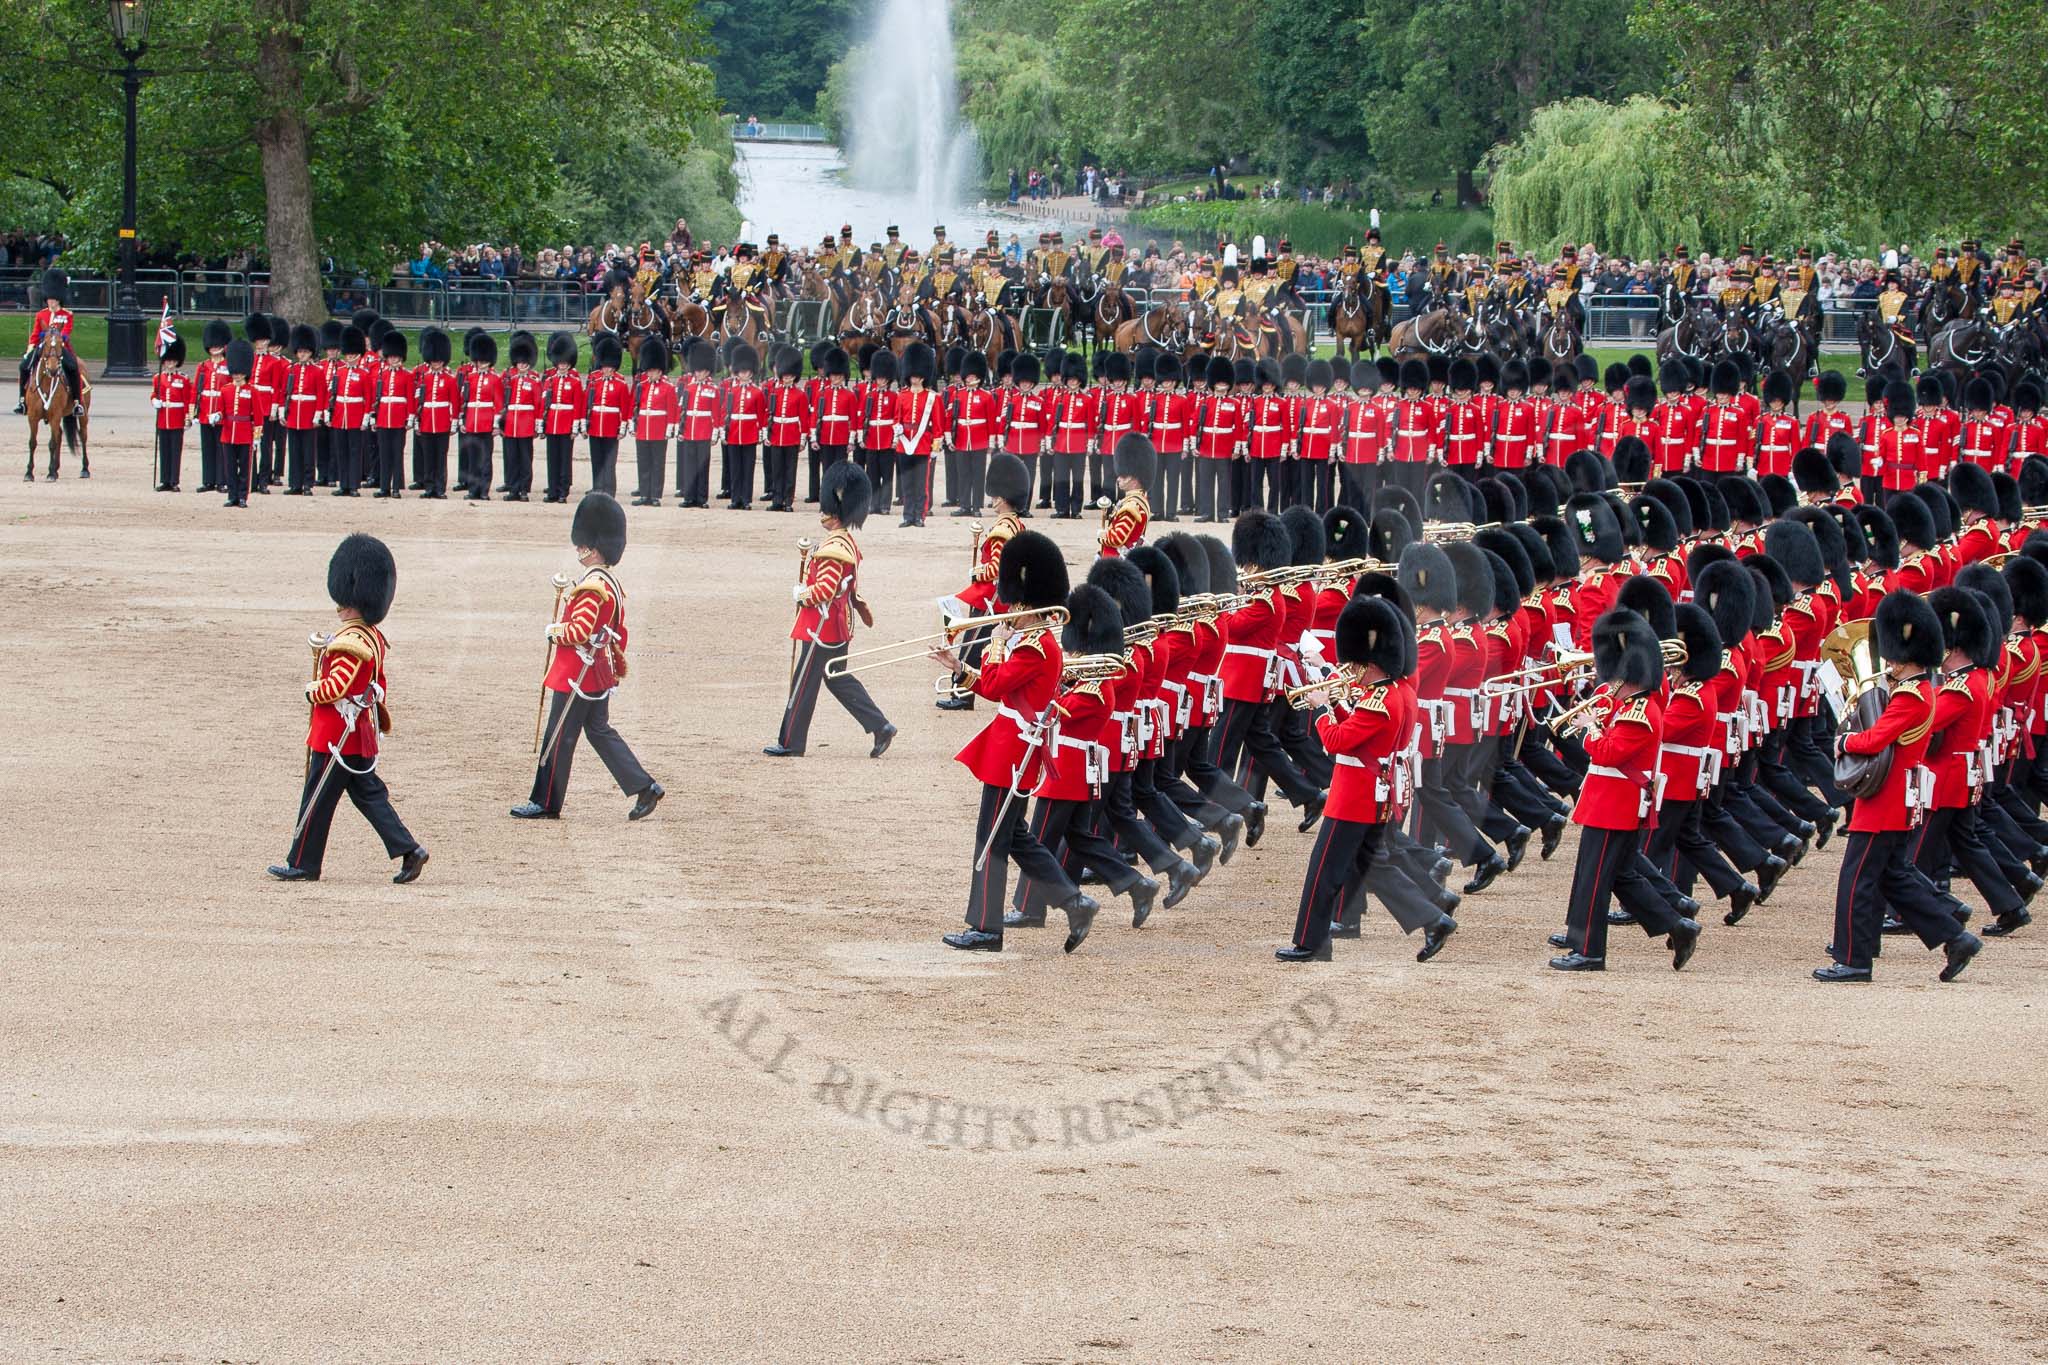 The Colonel's Review 2012: The Massed Bands Troop..
Horse Guards Parade, Westminster,
London SW1,

United Kingdom,
on 09 June 2012 at 11:10, image #233